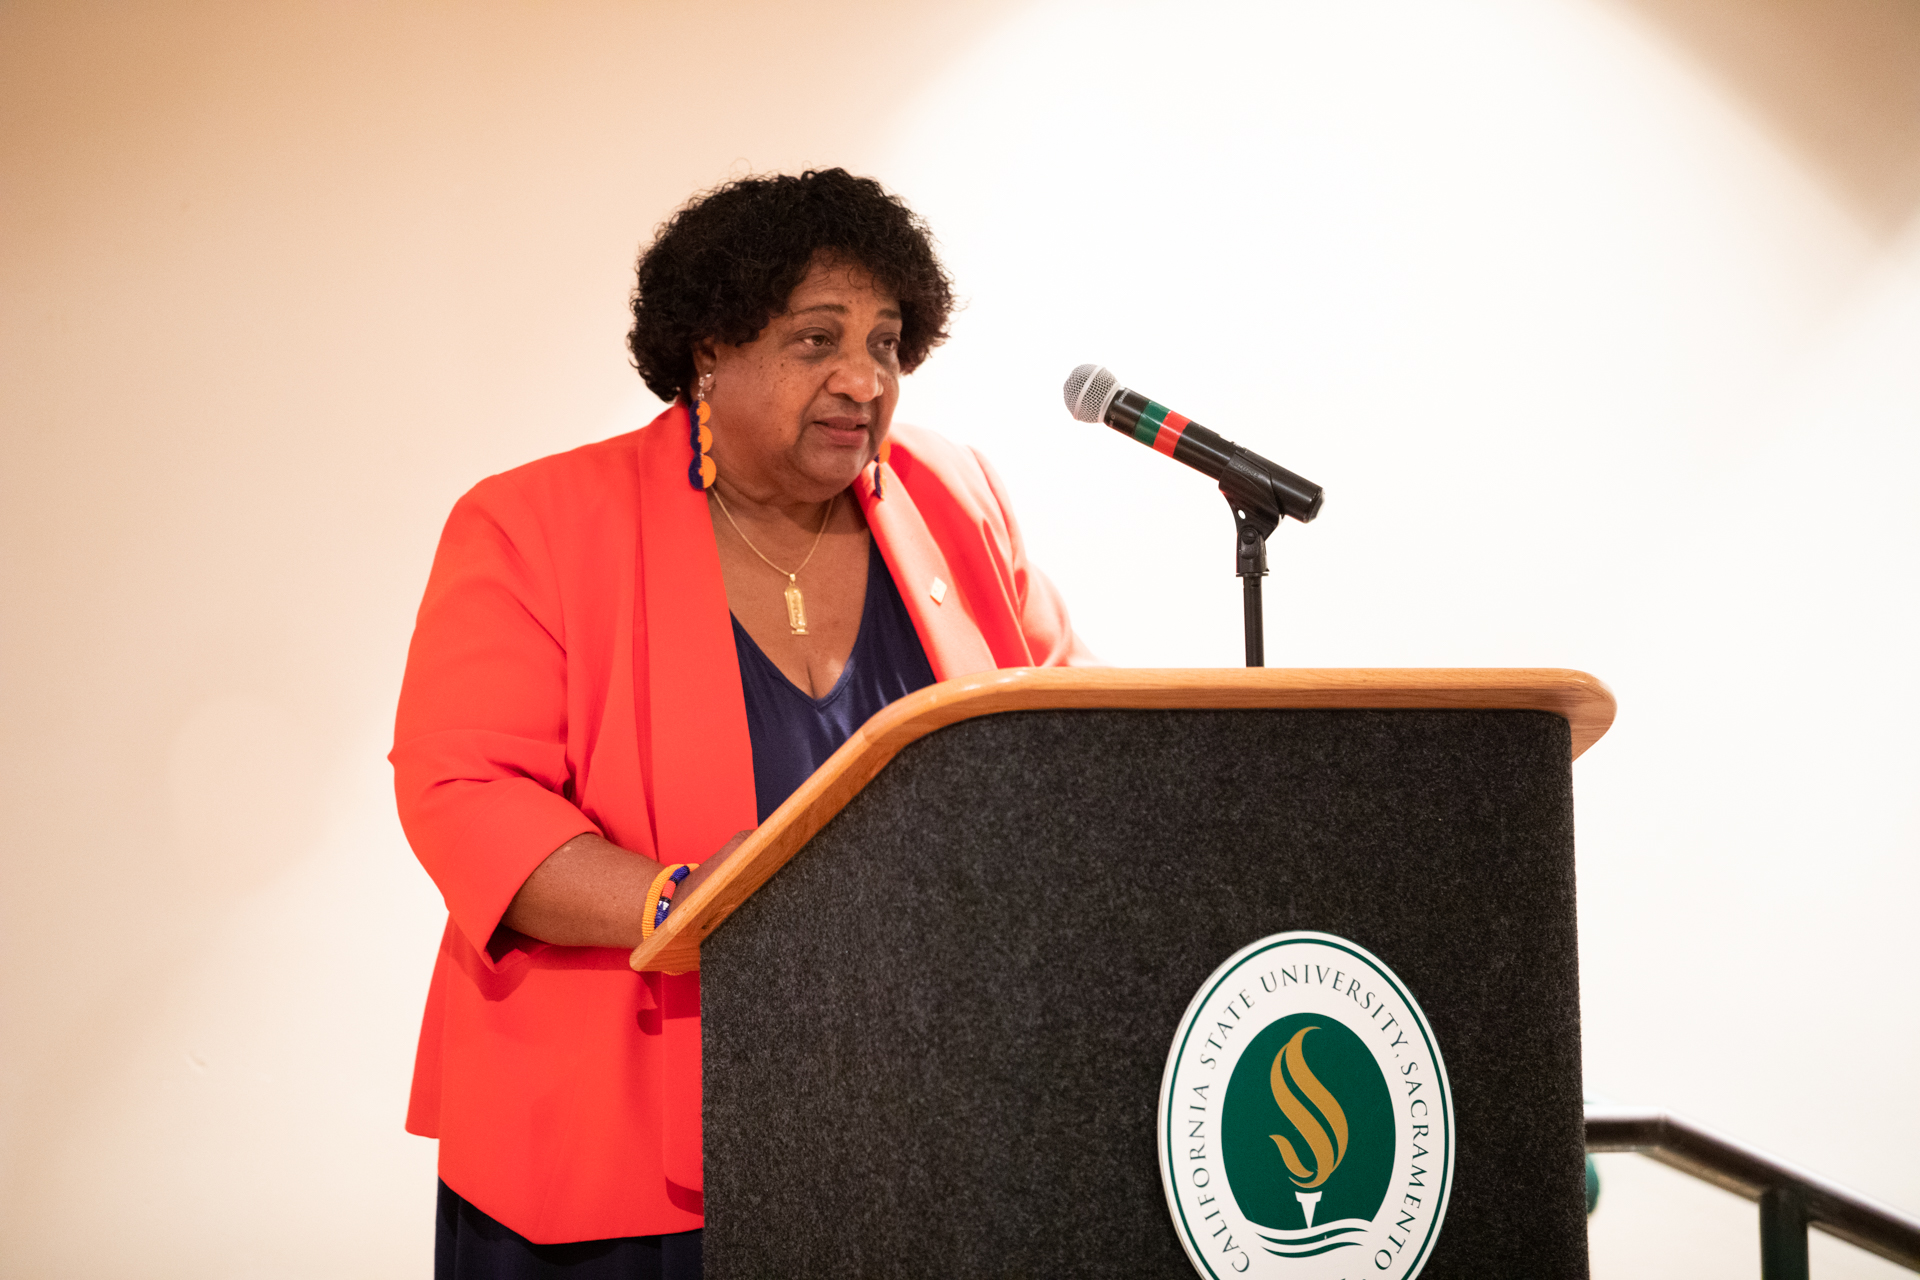 California Secretary of State Shirley N. Weber, wearing a vibrant red jacket, speaks at a podium during a recent voter rights forum at Sac State's Hinde Auditorium.